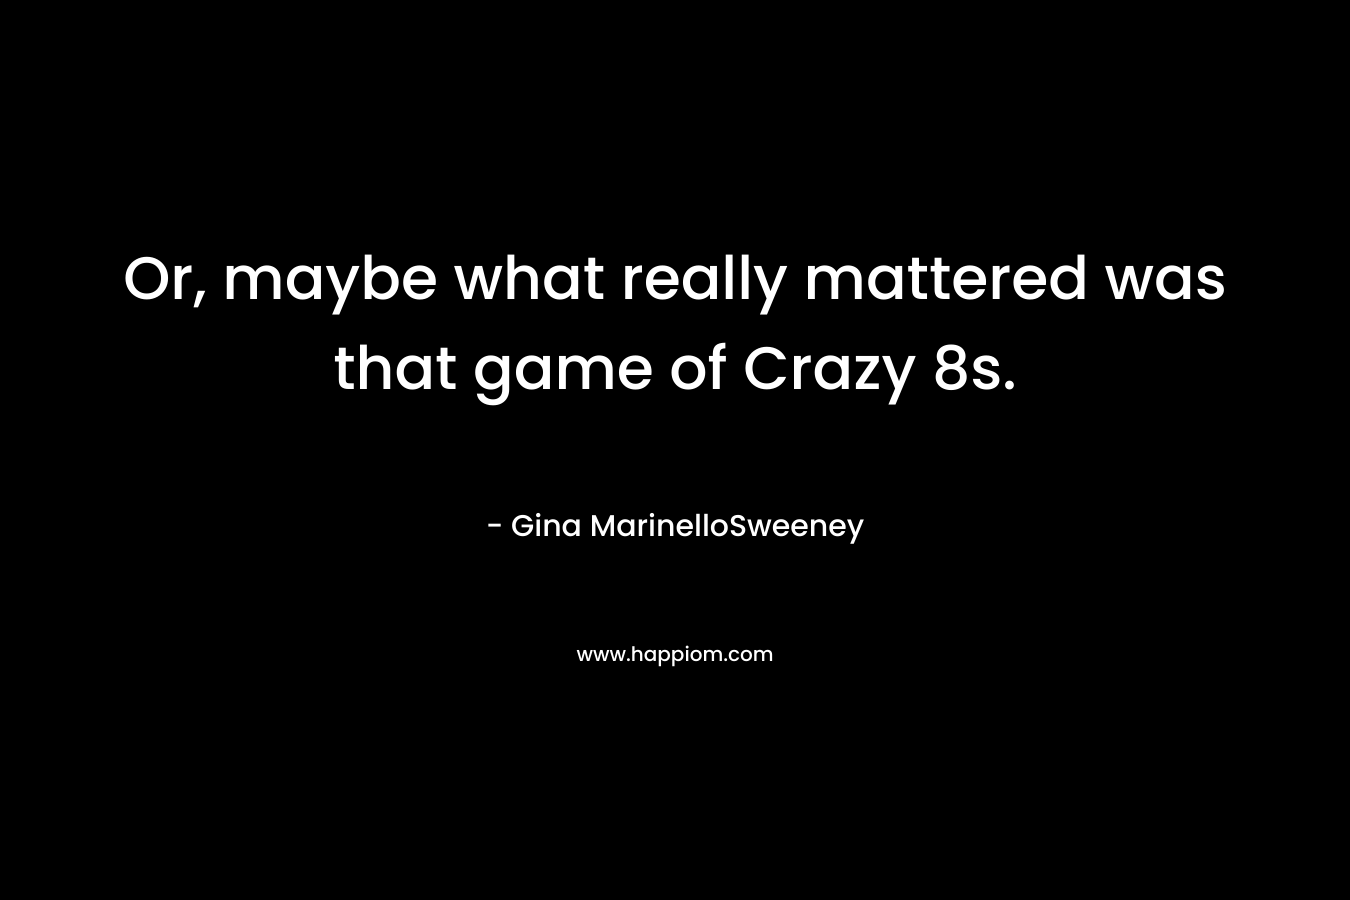 Or, maybe what really mattered was that game of Crazy 8s. – Gina MarinelloSweeney